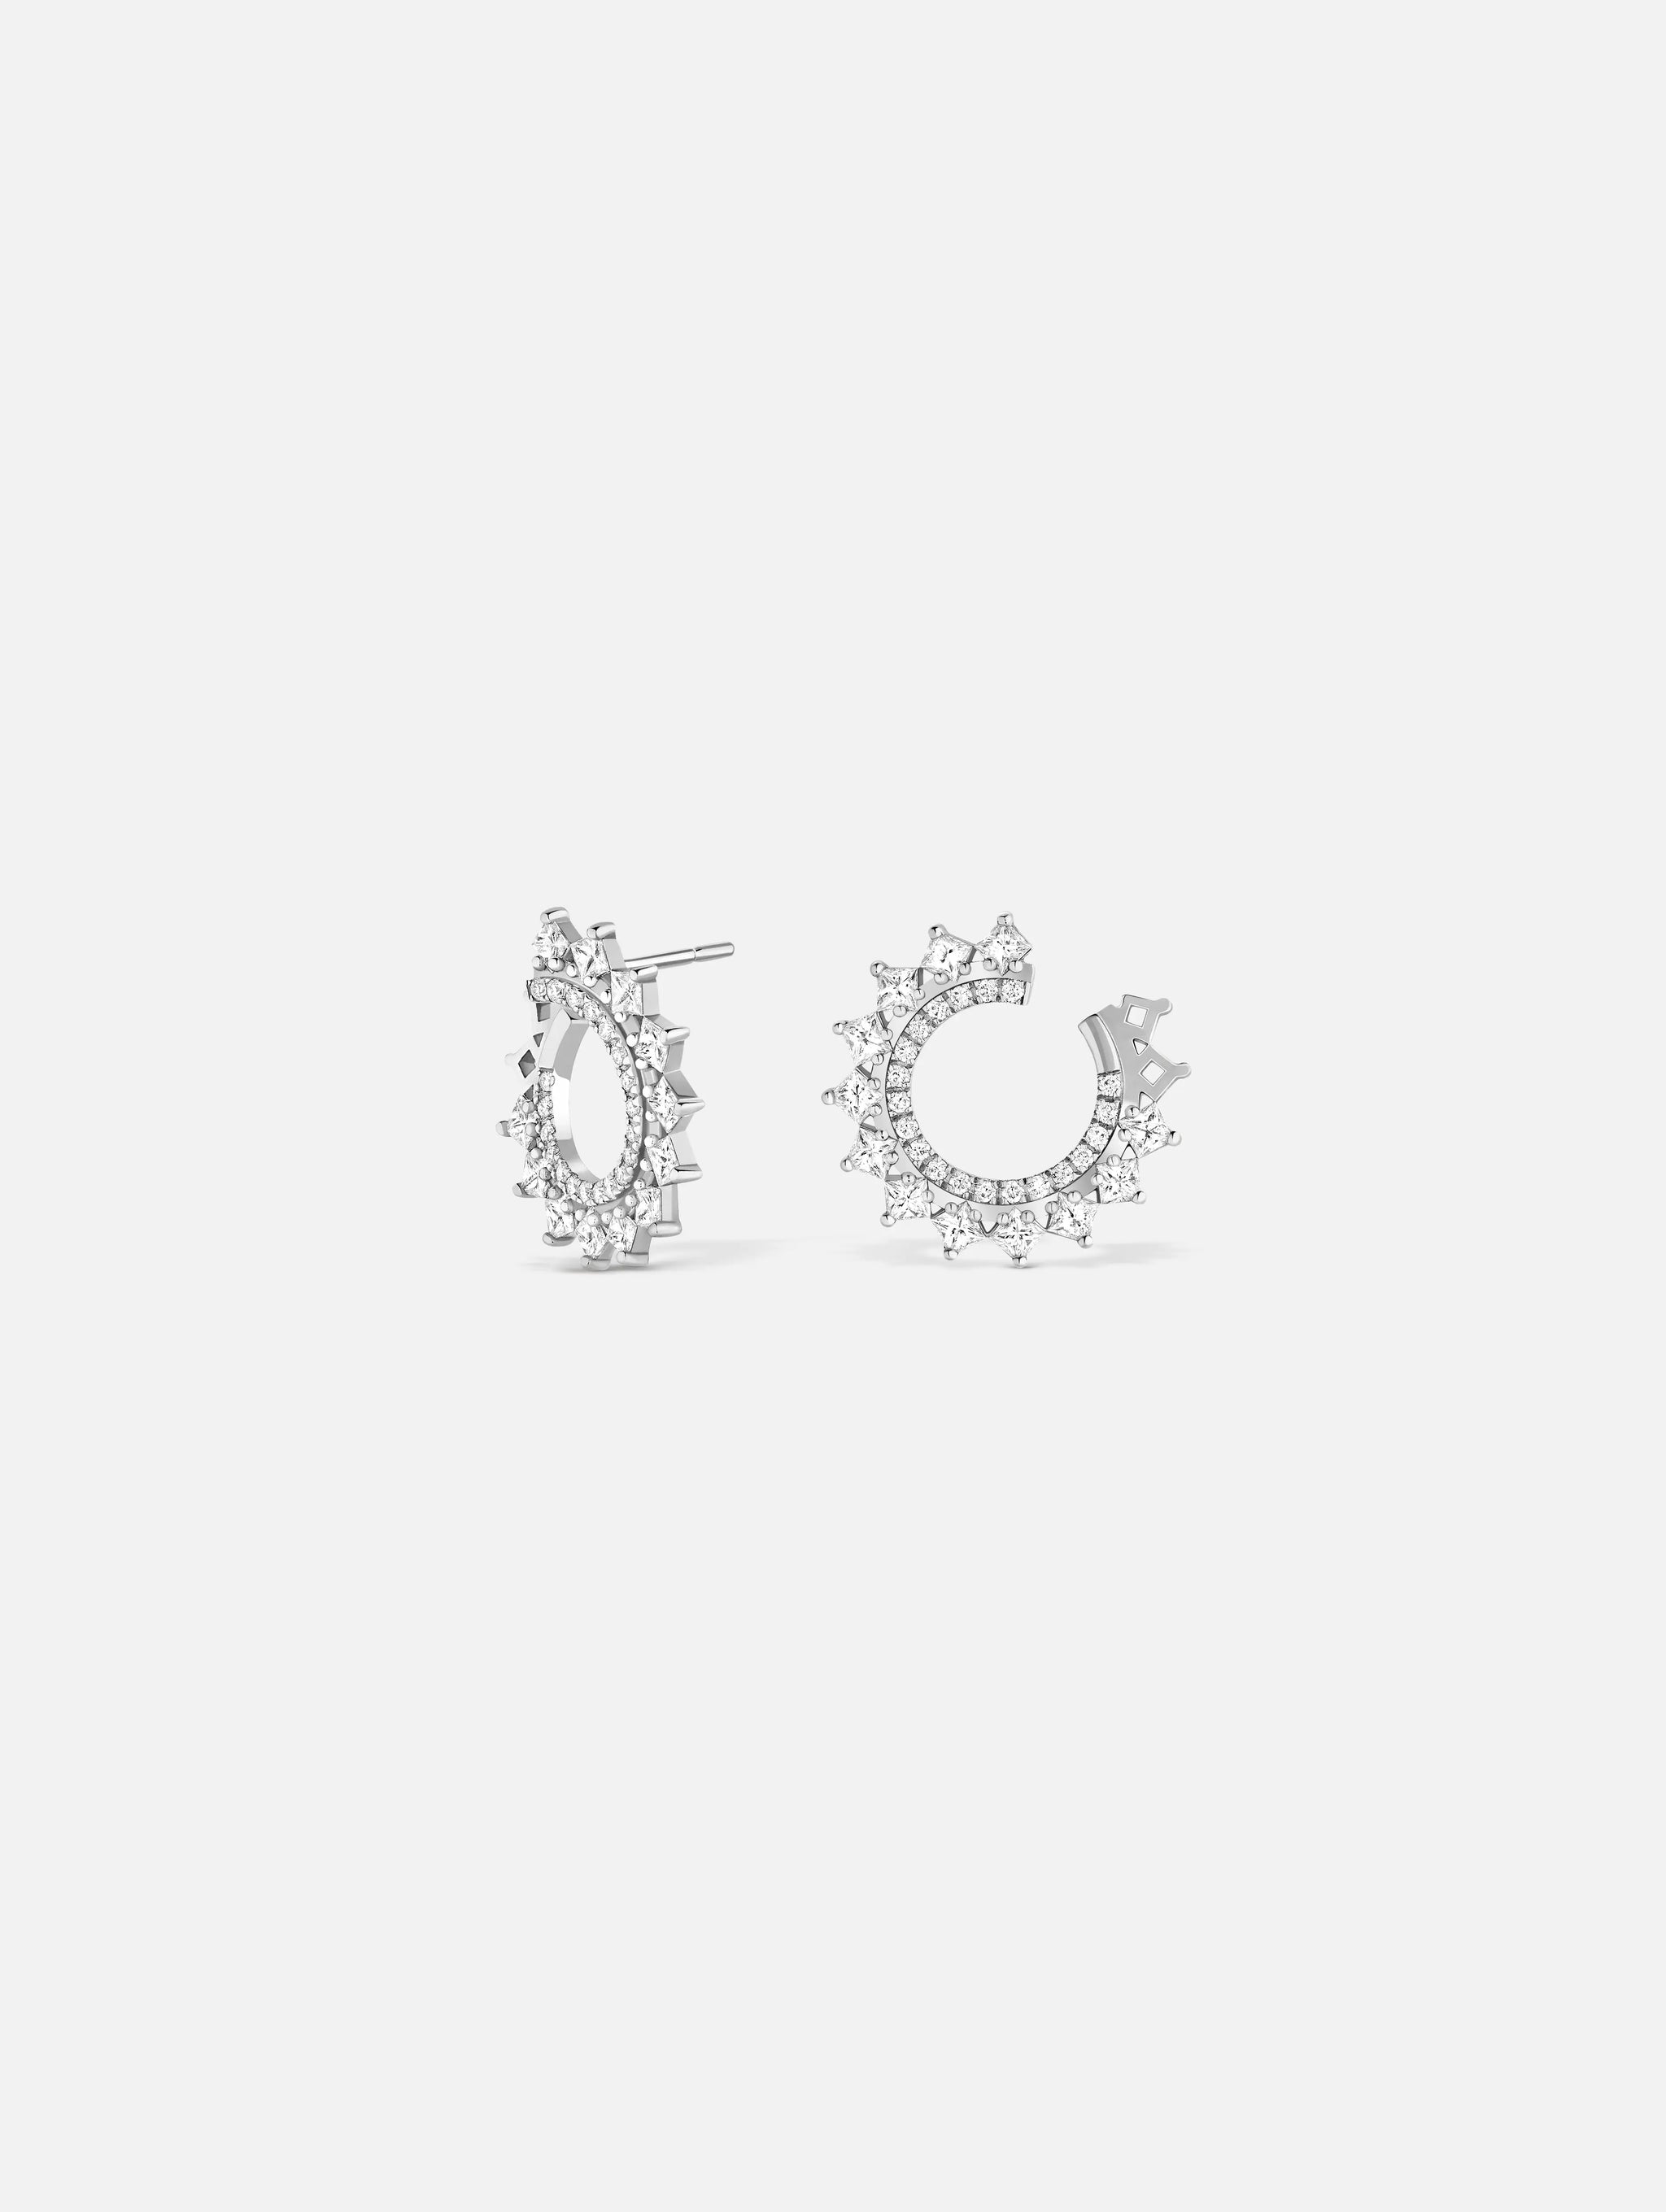 Princess Diamond Earrings in White Gold - 1 - Nouvel Heritage